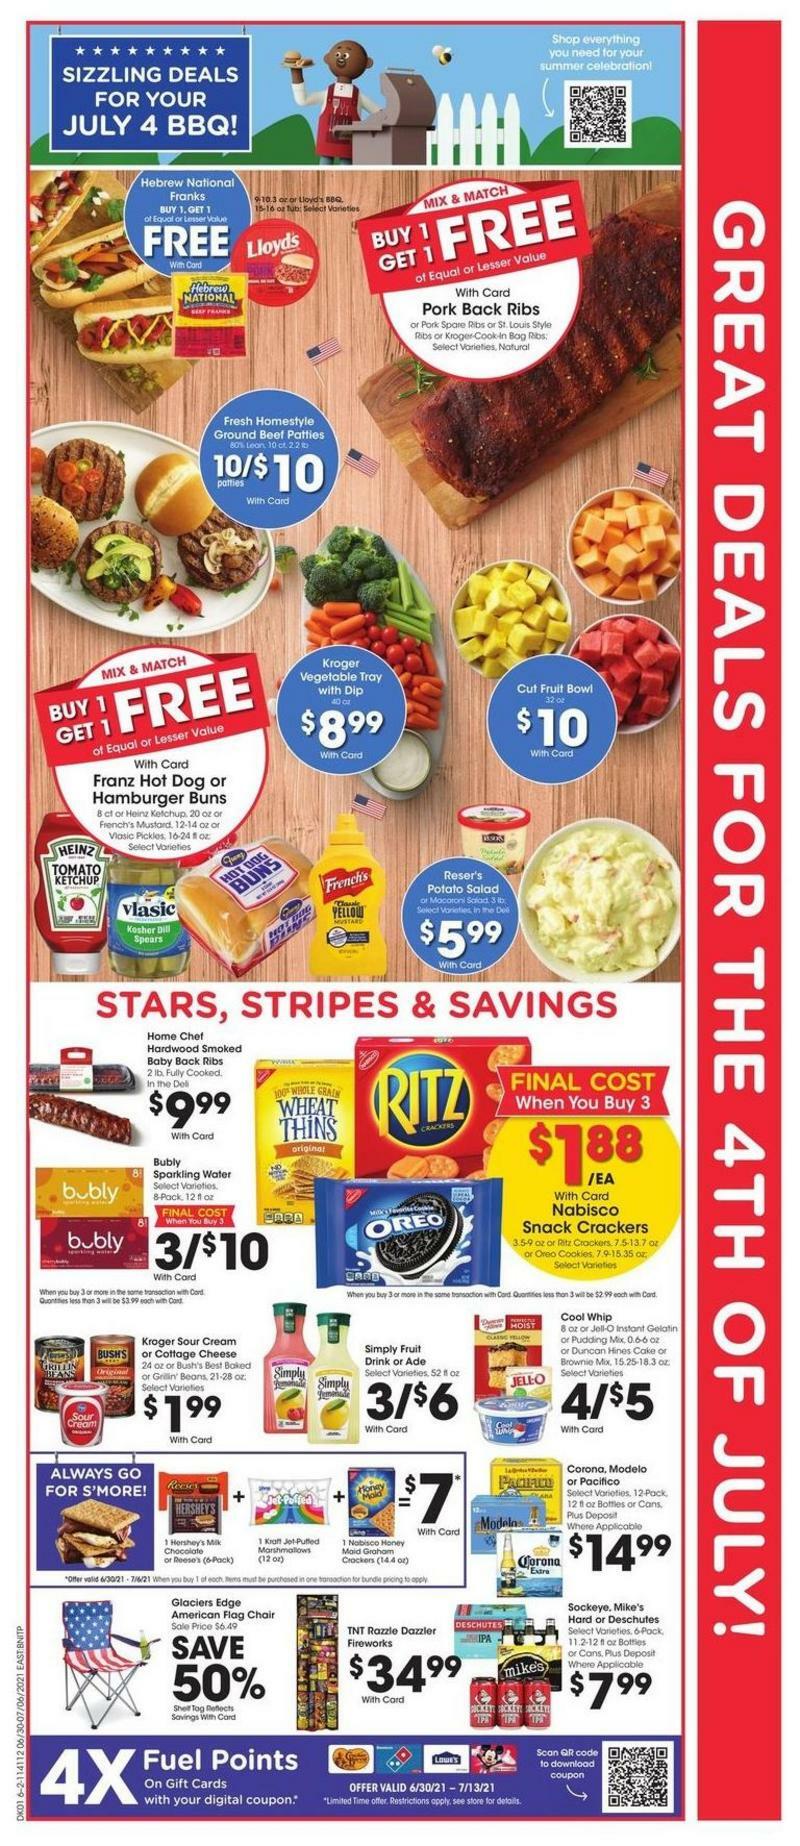 Fred Meyer Weekly Ad from June 30